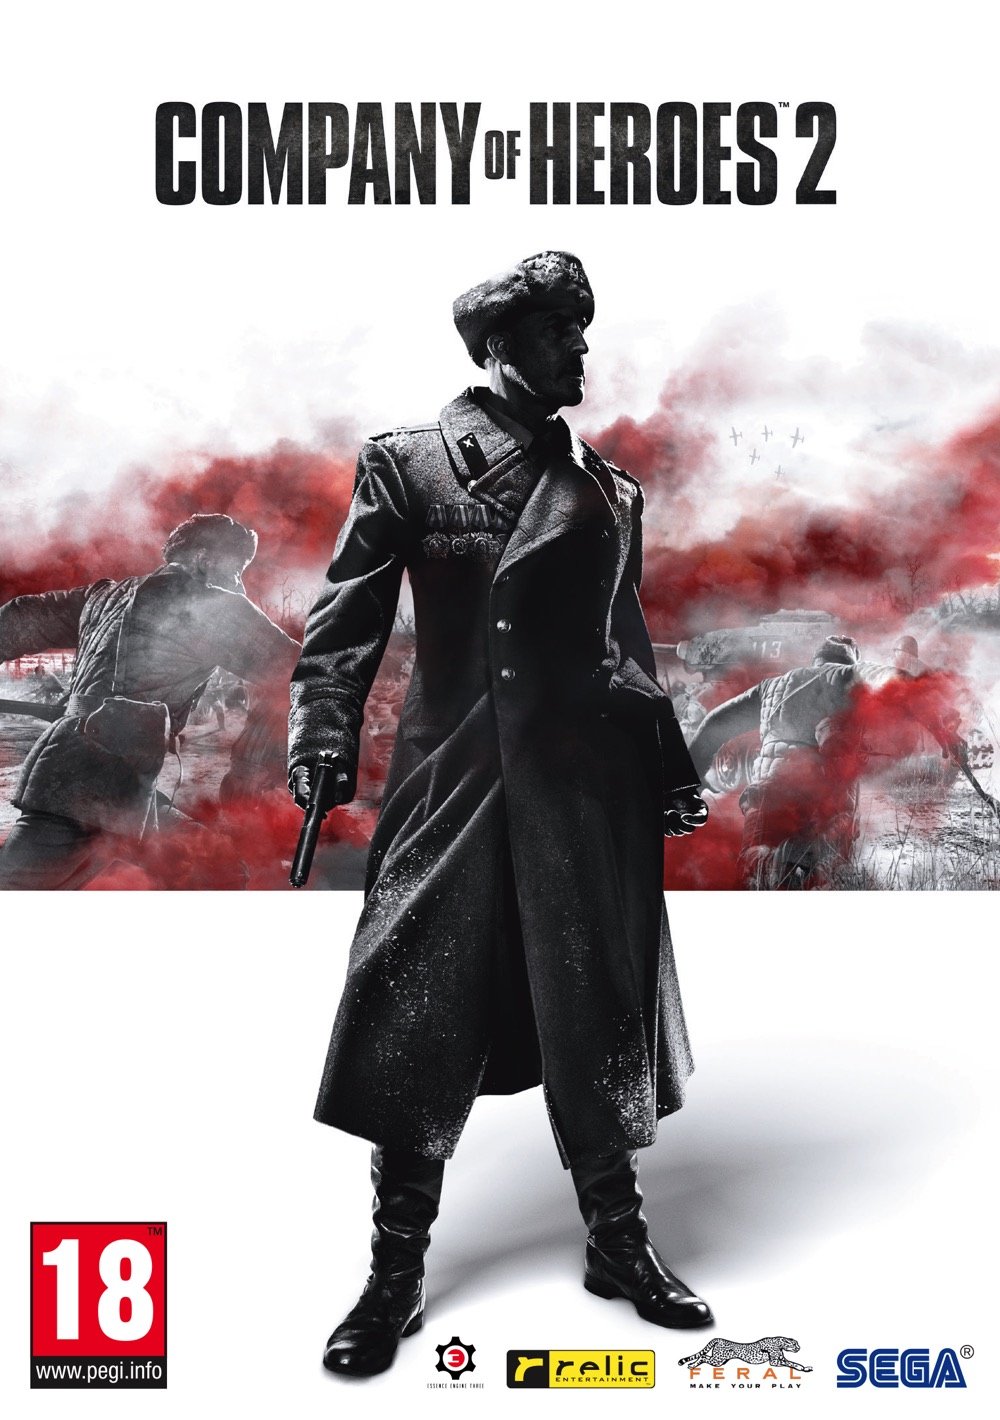 company of heroes 2 steam download free